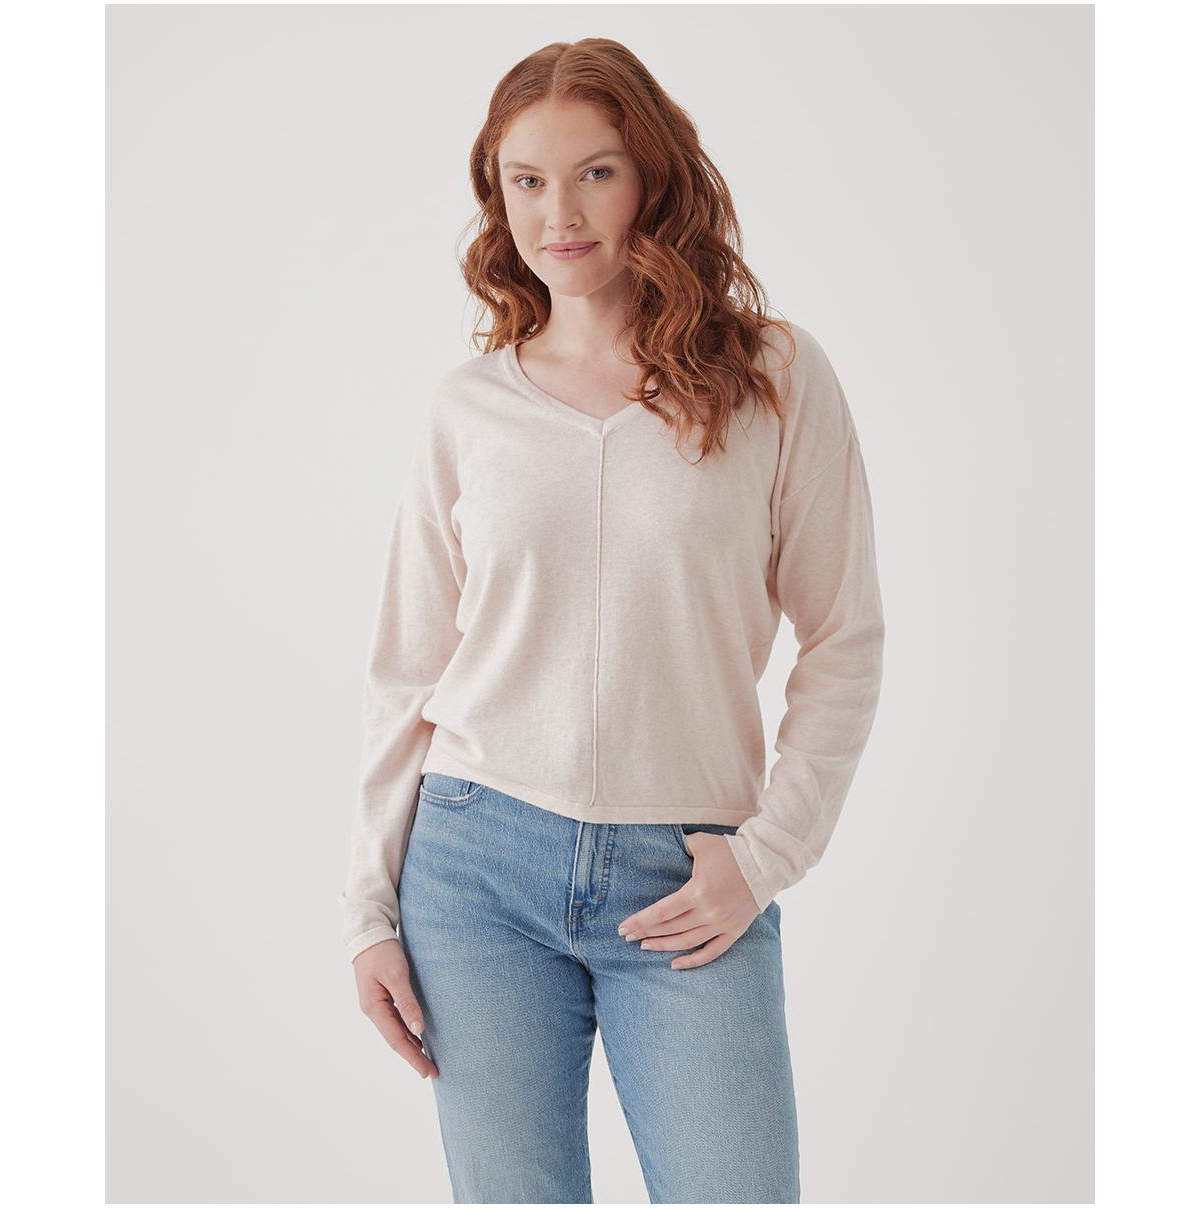 Organic Cotton Classic Fine Knit Relaxed Sweater - Blush heather